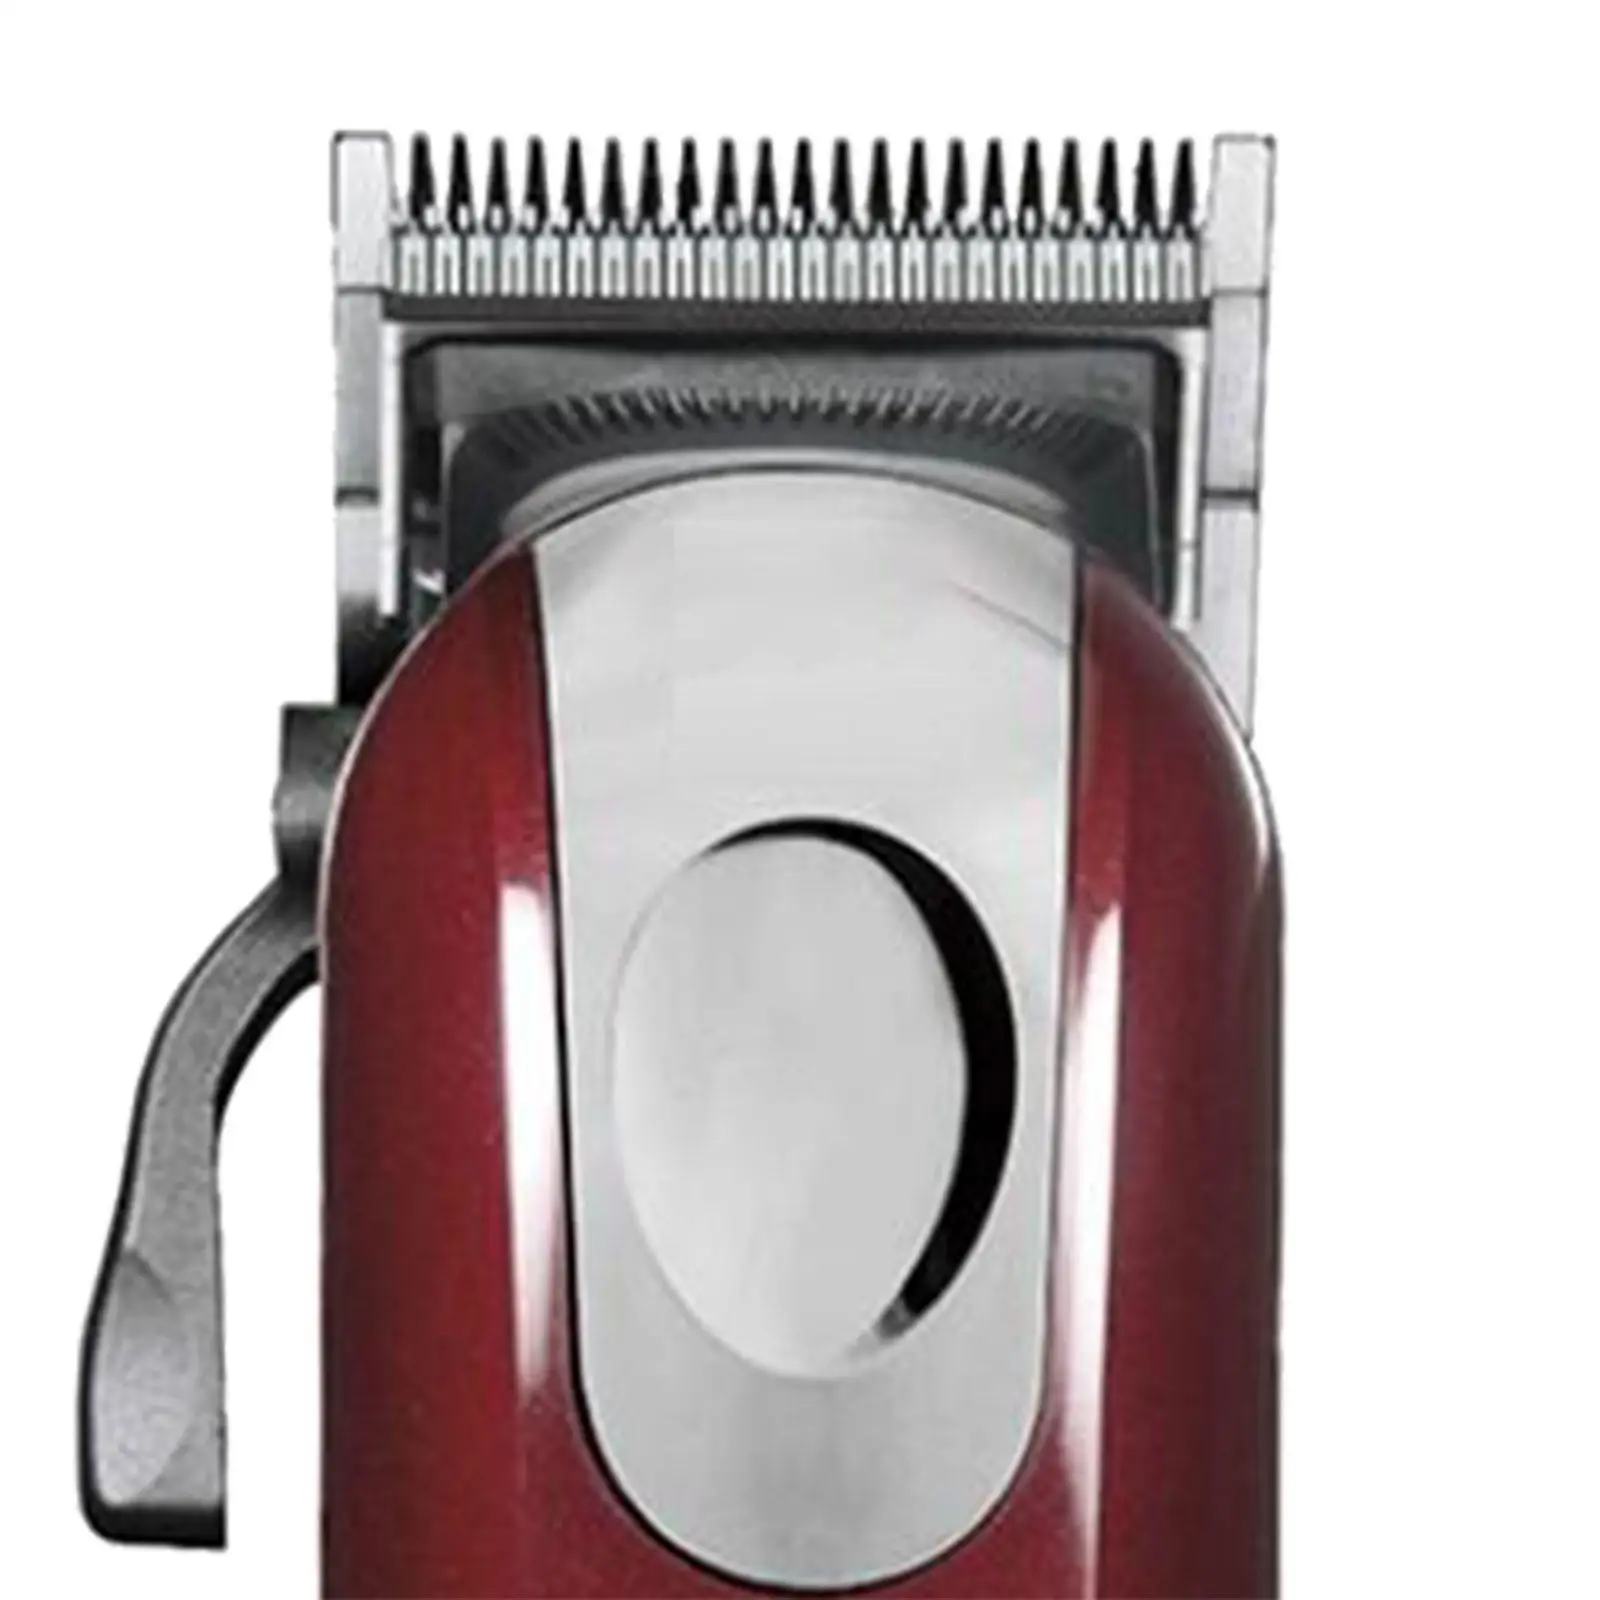 Hair Clipper Kit 8148 Machine EU Power Adapter with Oil, Cutting Guides, Styling Comb Versatile Sturdy Cord and Cordless T Blade